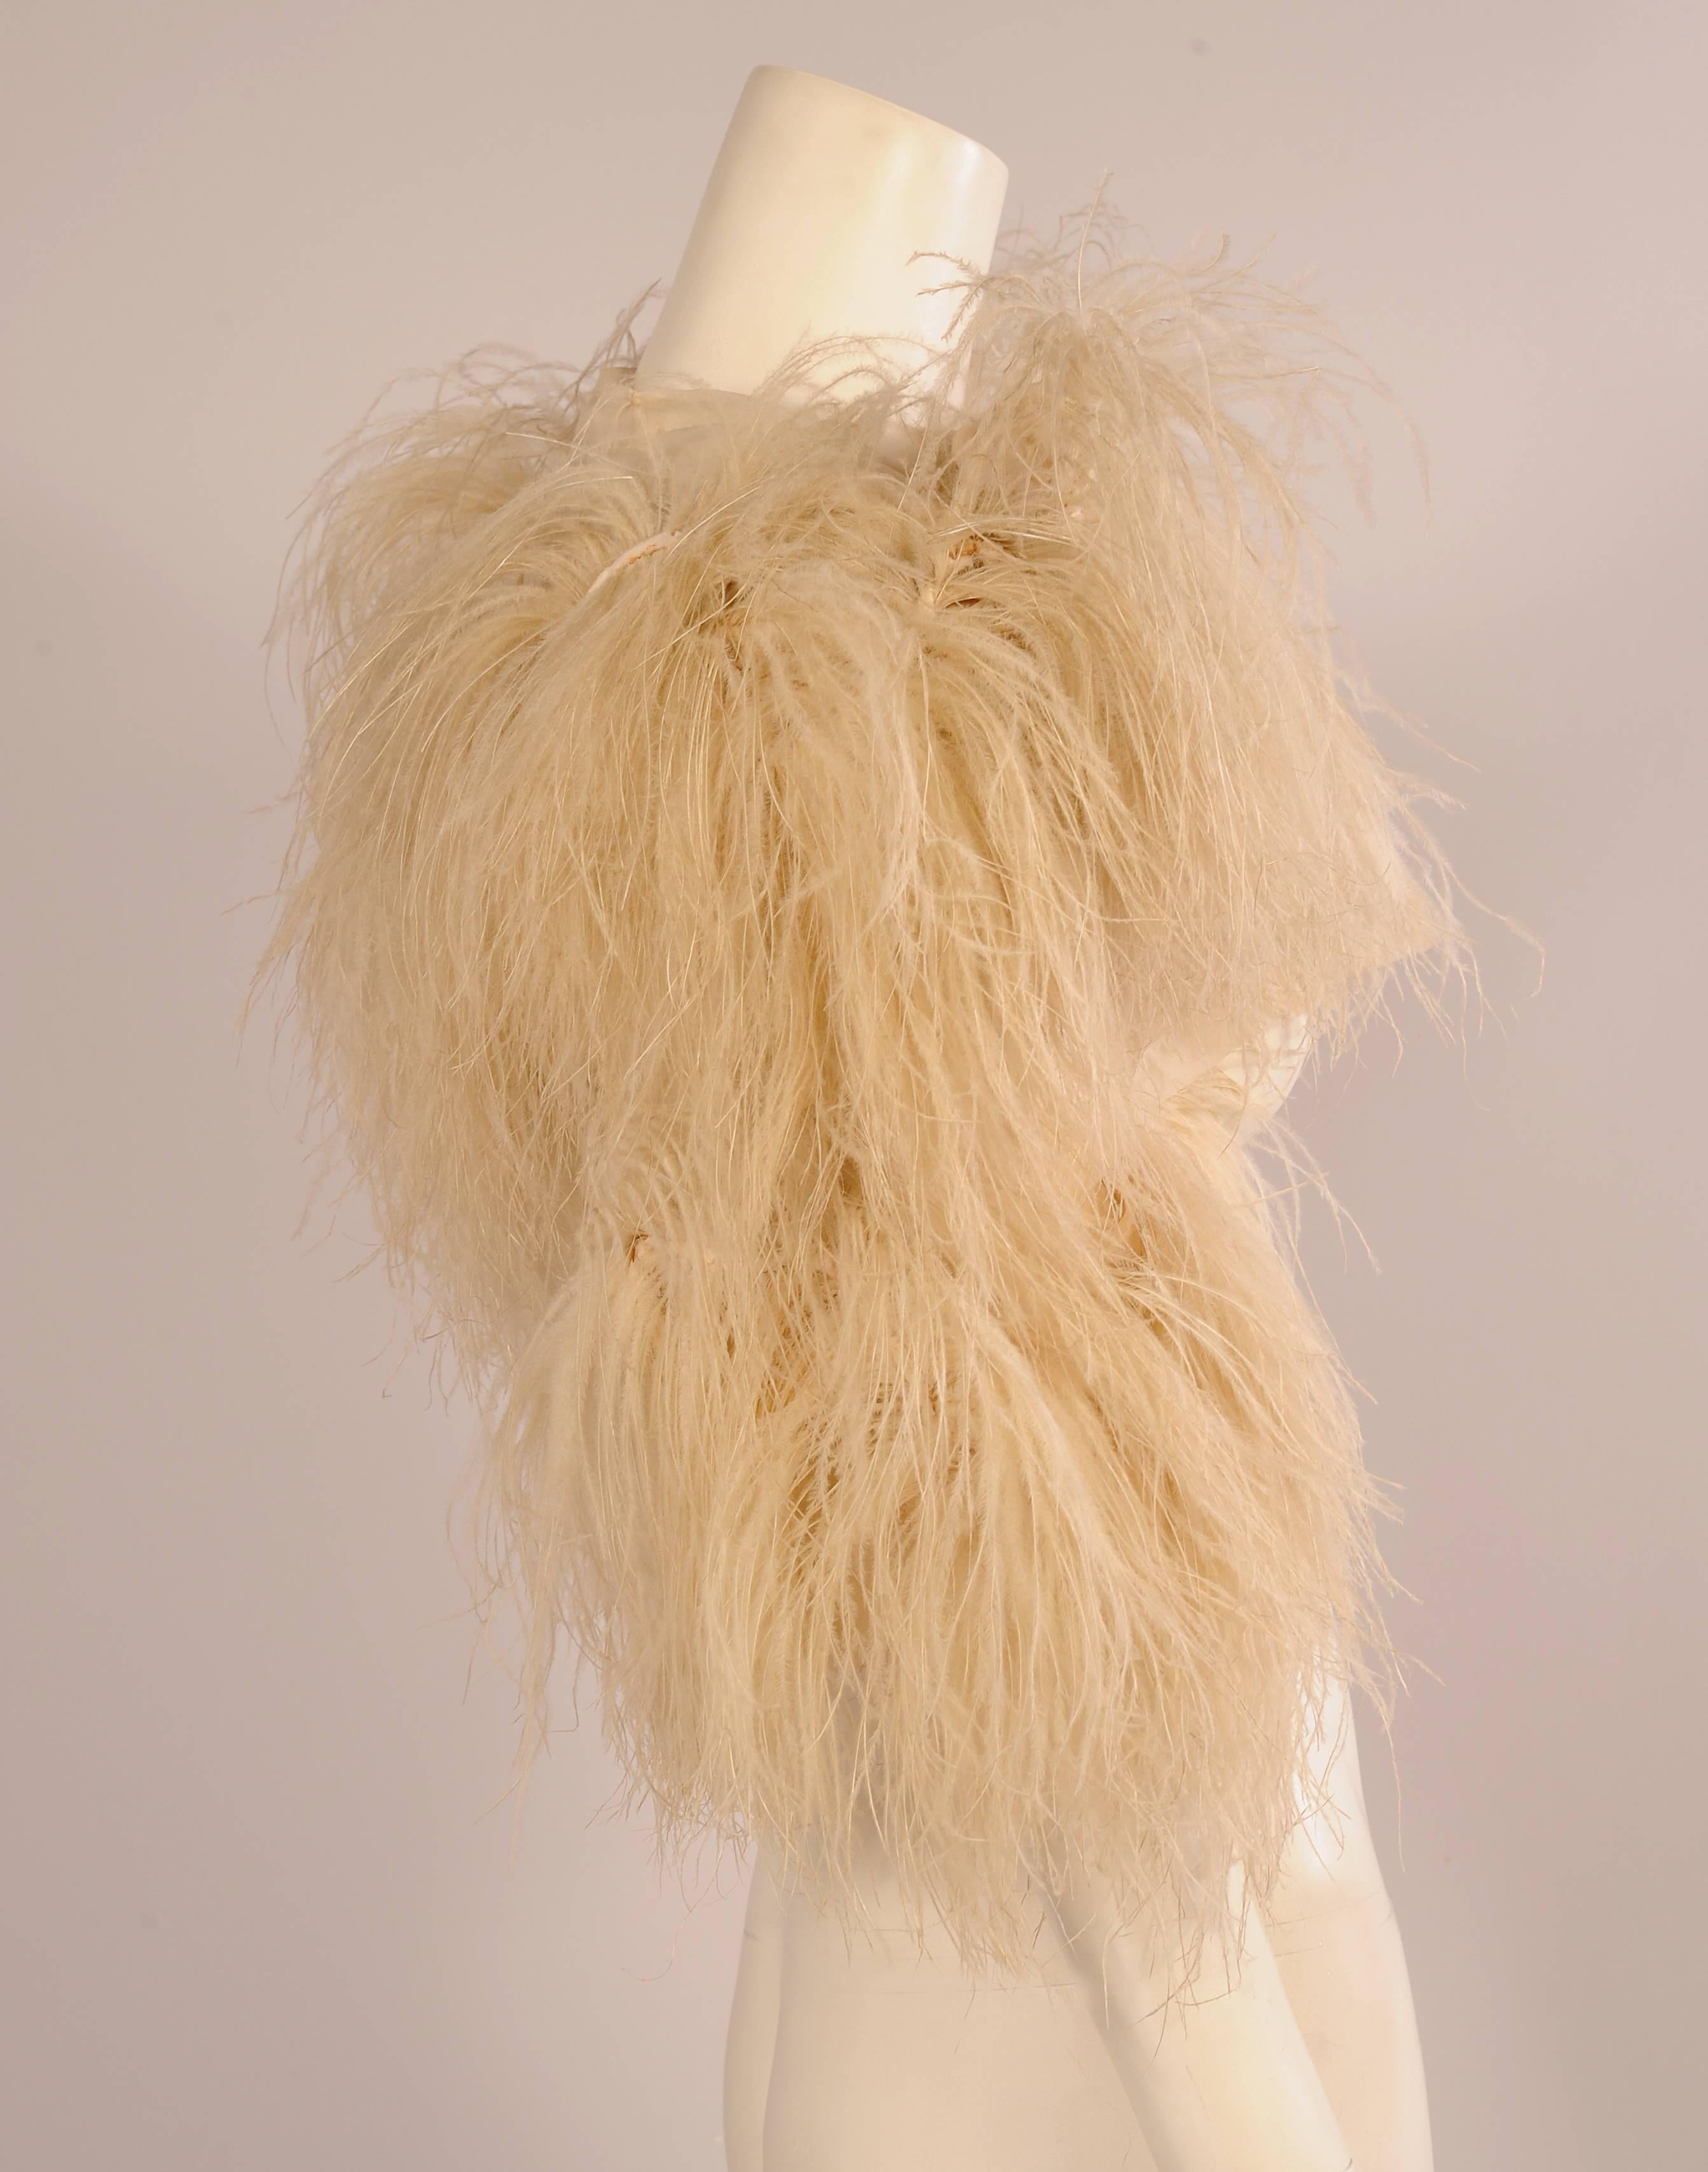 A little powder puff of an evening jacket, this rare 1920's haute couture piece from Paquin is made from cream colored silk organza covered with creamy ostrich feathers. It is all hand made and hand finished. The construction is quite elaborate with